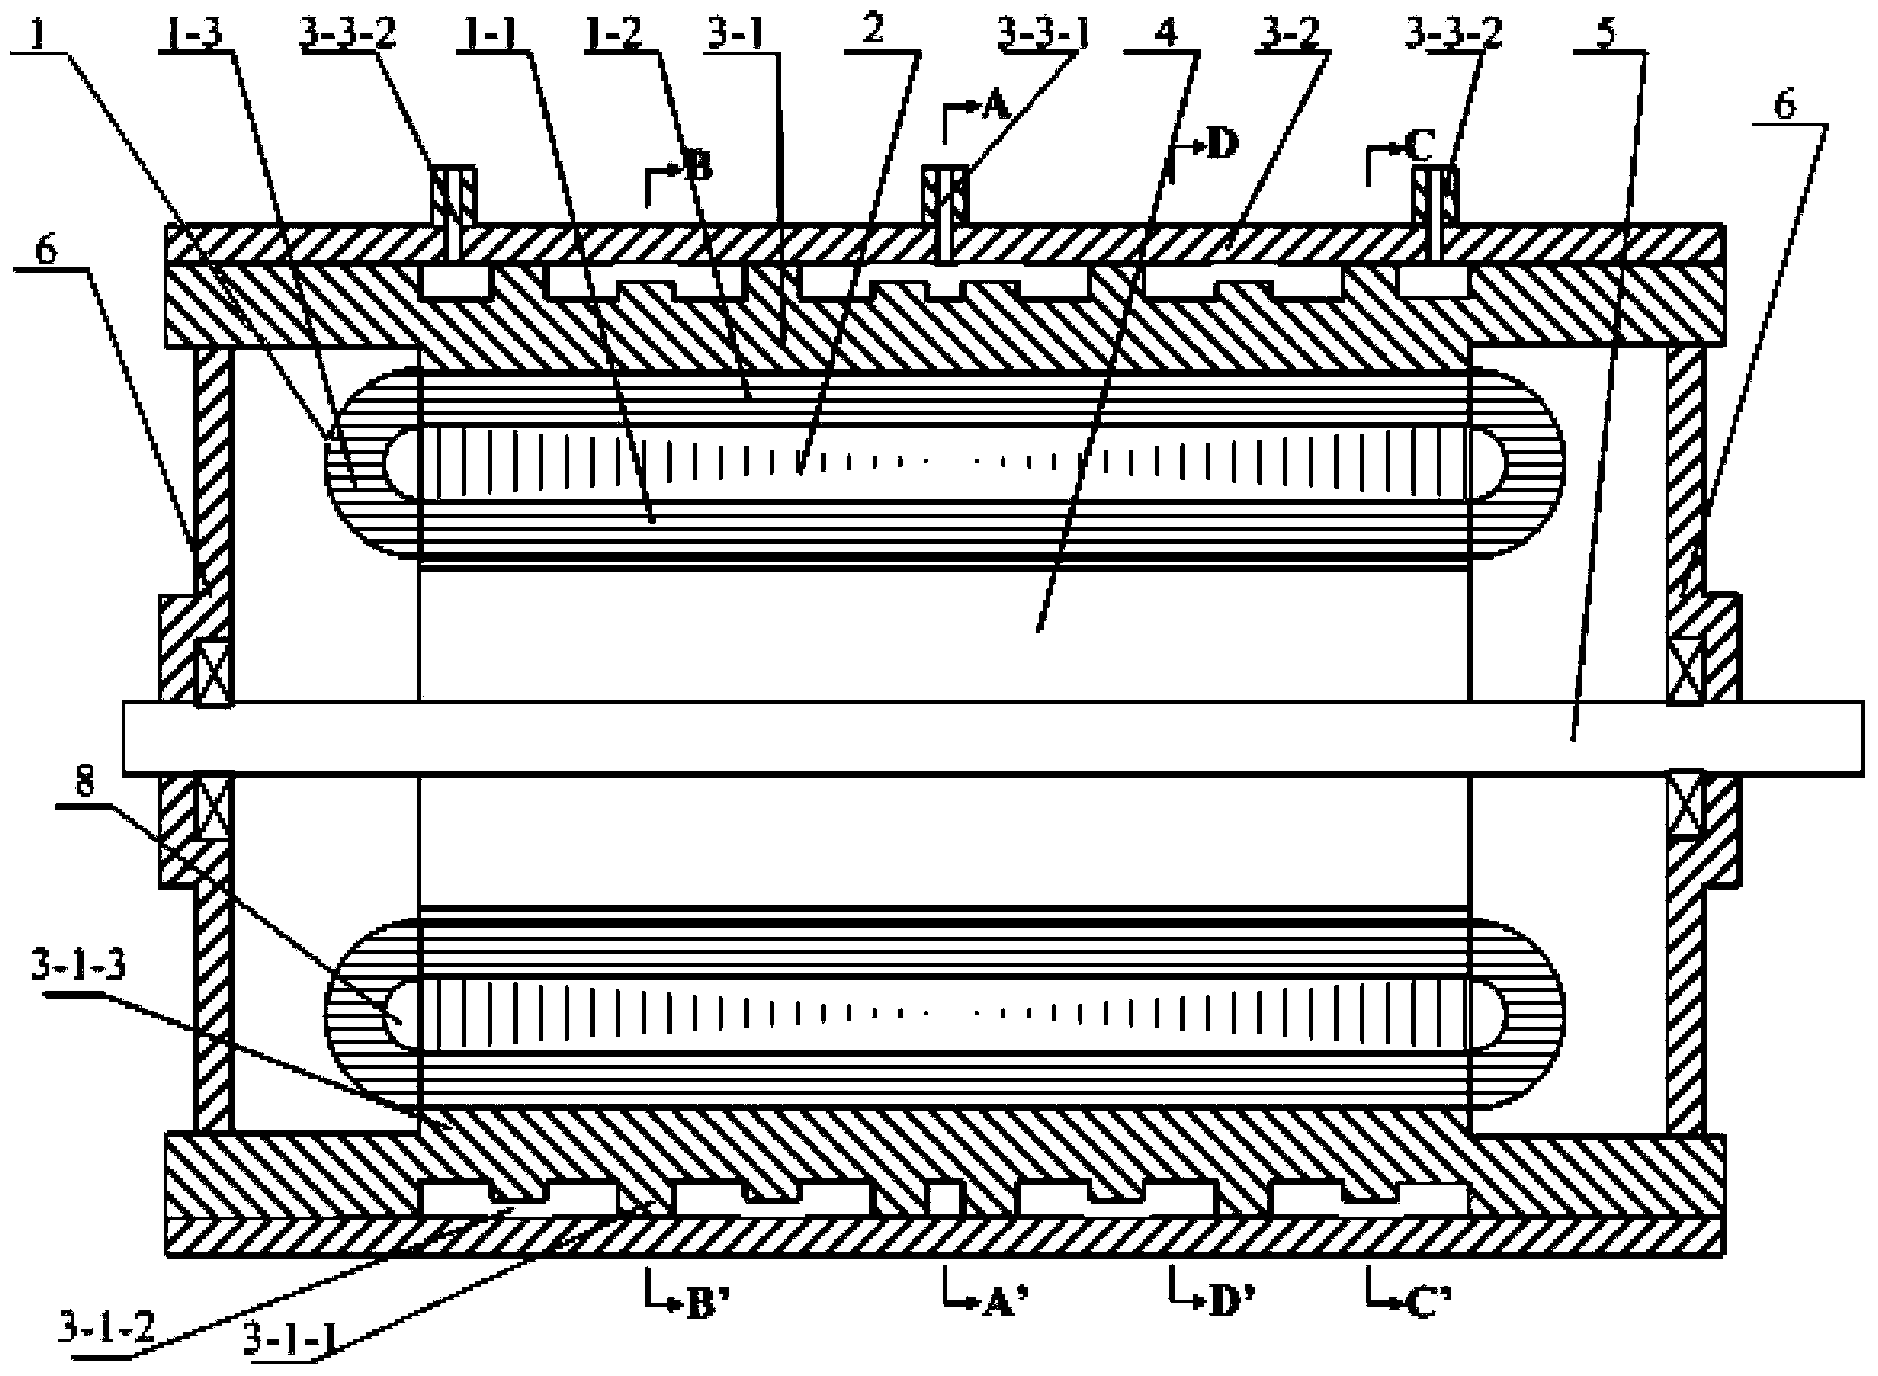 High-power density motor with water cooling structure